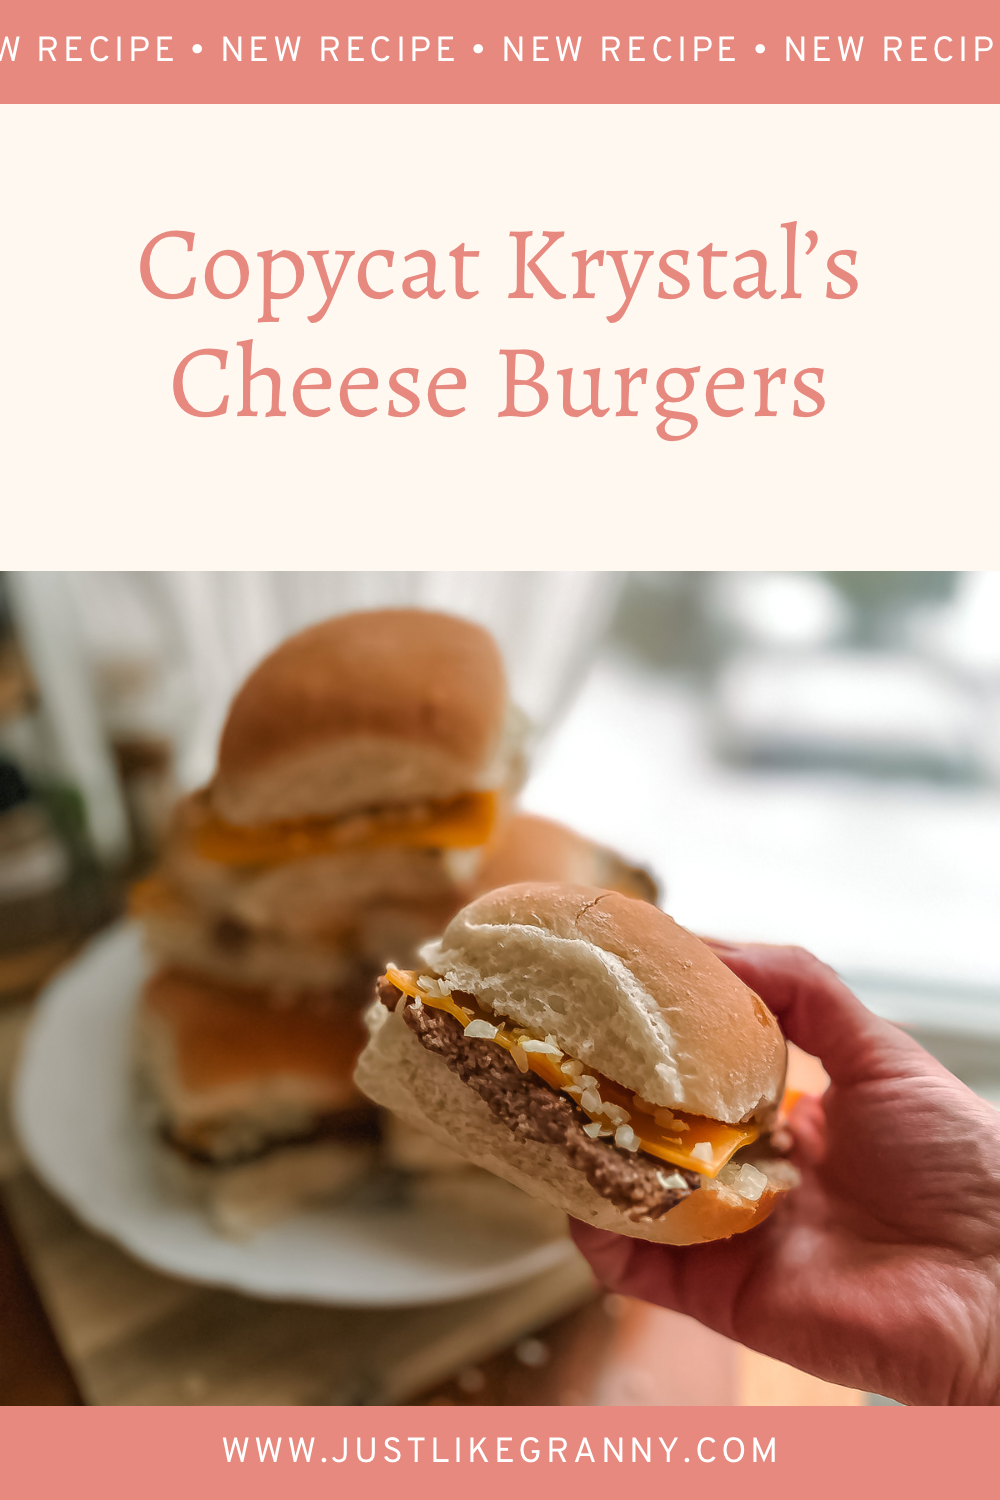 The burgers at Krystal may be small, but they're perfect for